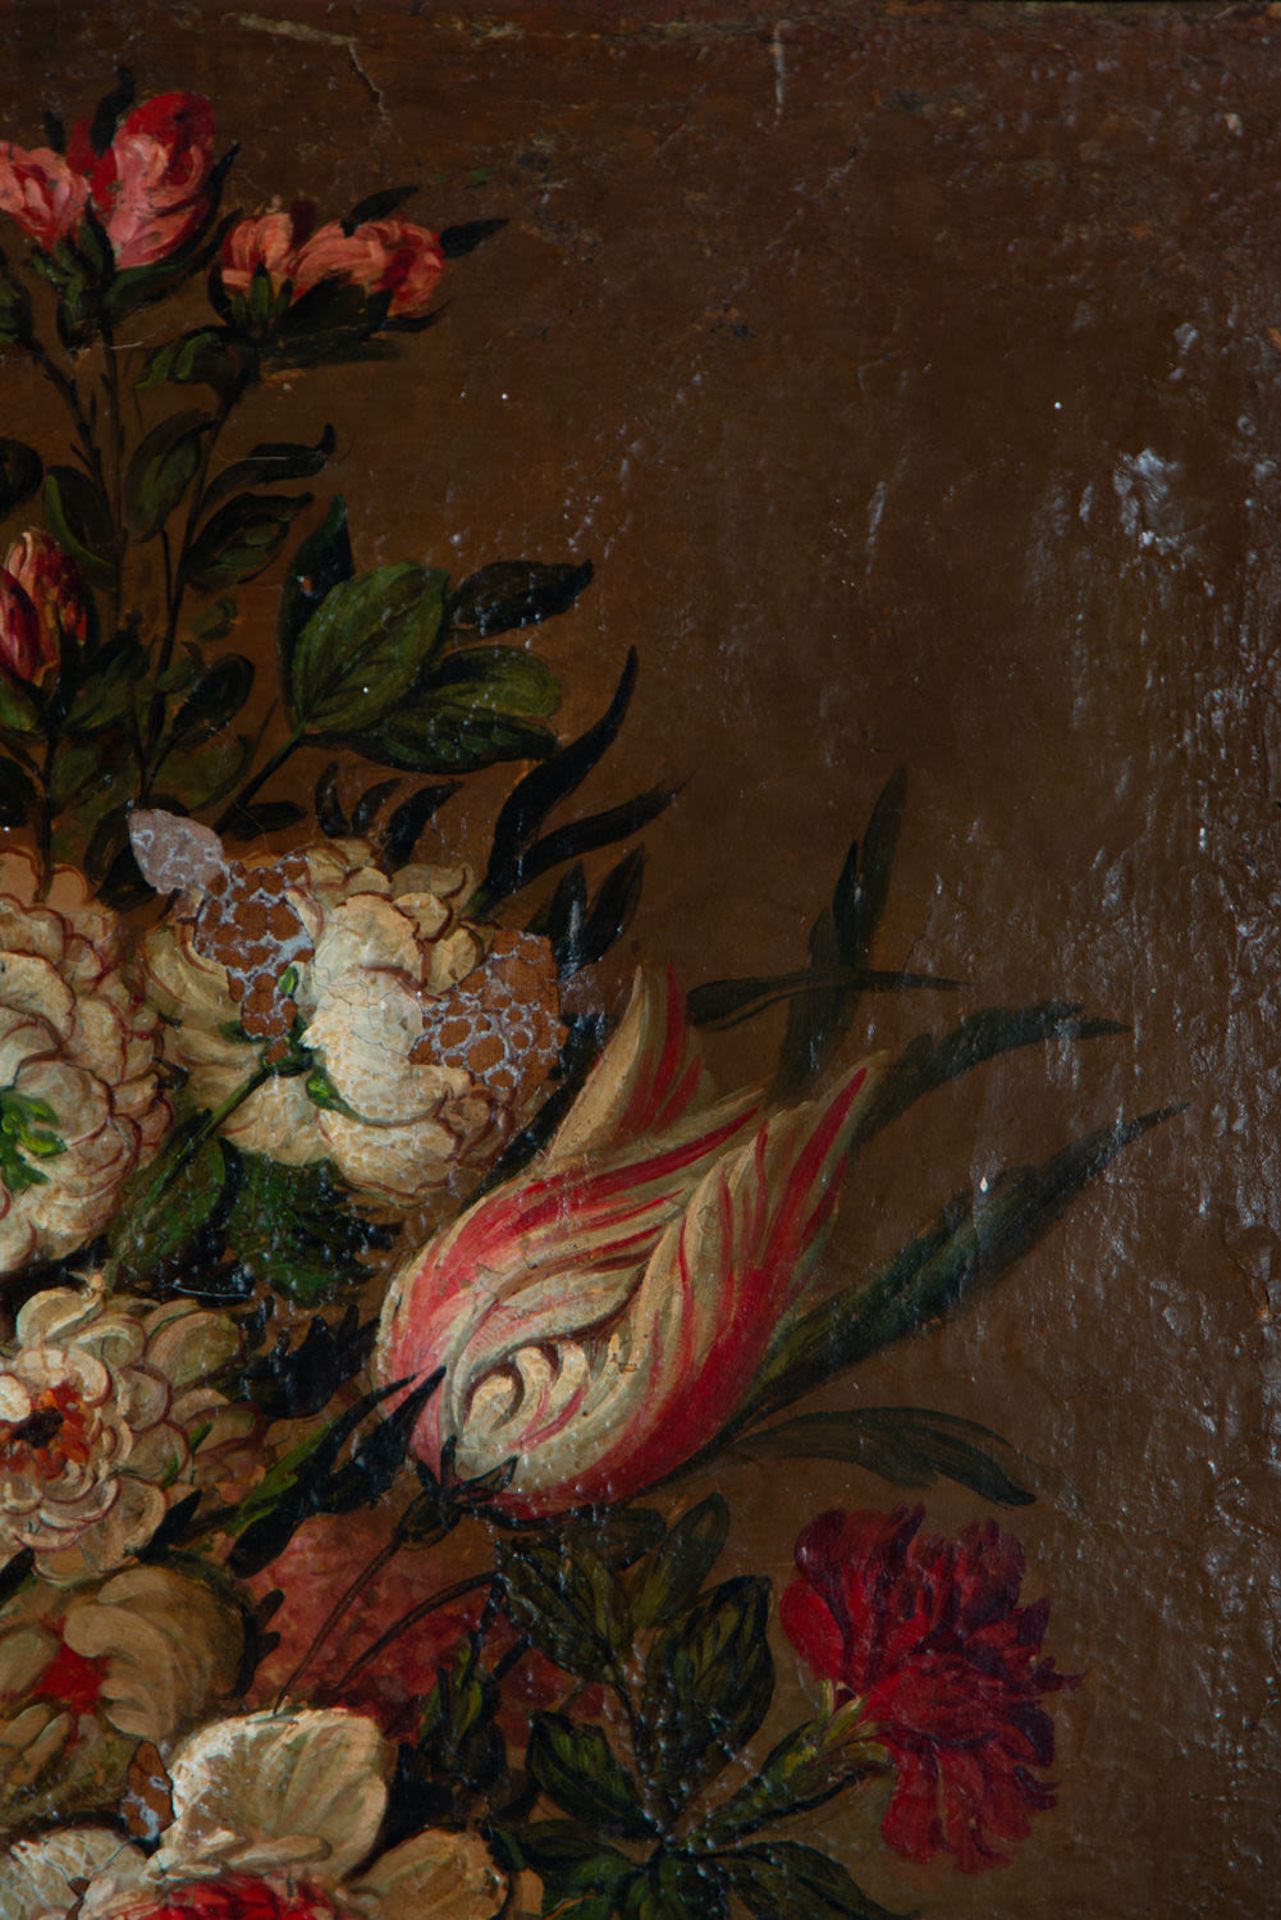 Pair of large still lifes of Flowers, Dutch school of the 17th - 18th century - Image 17 of 20